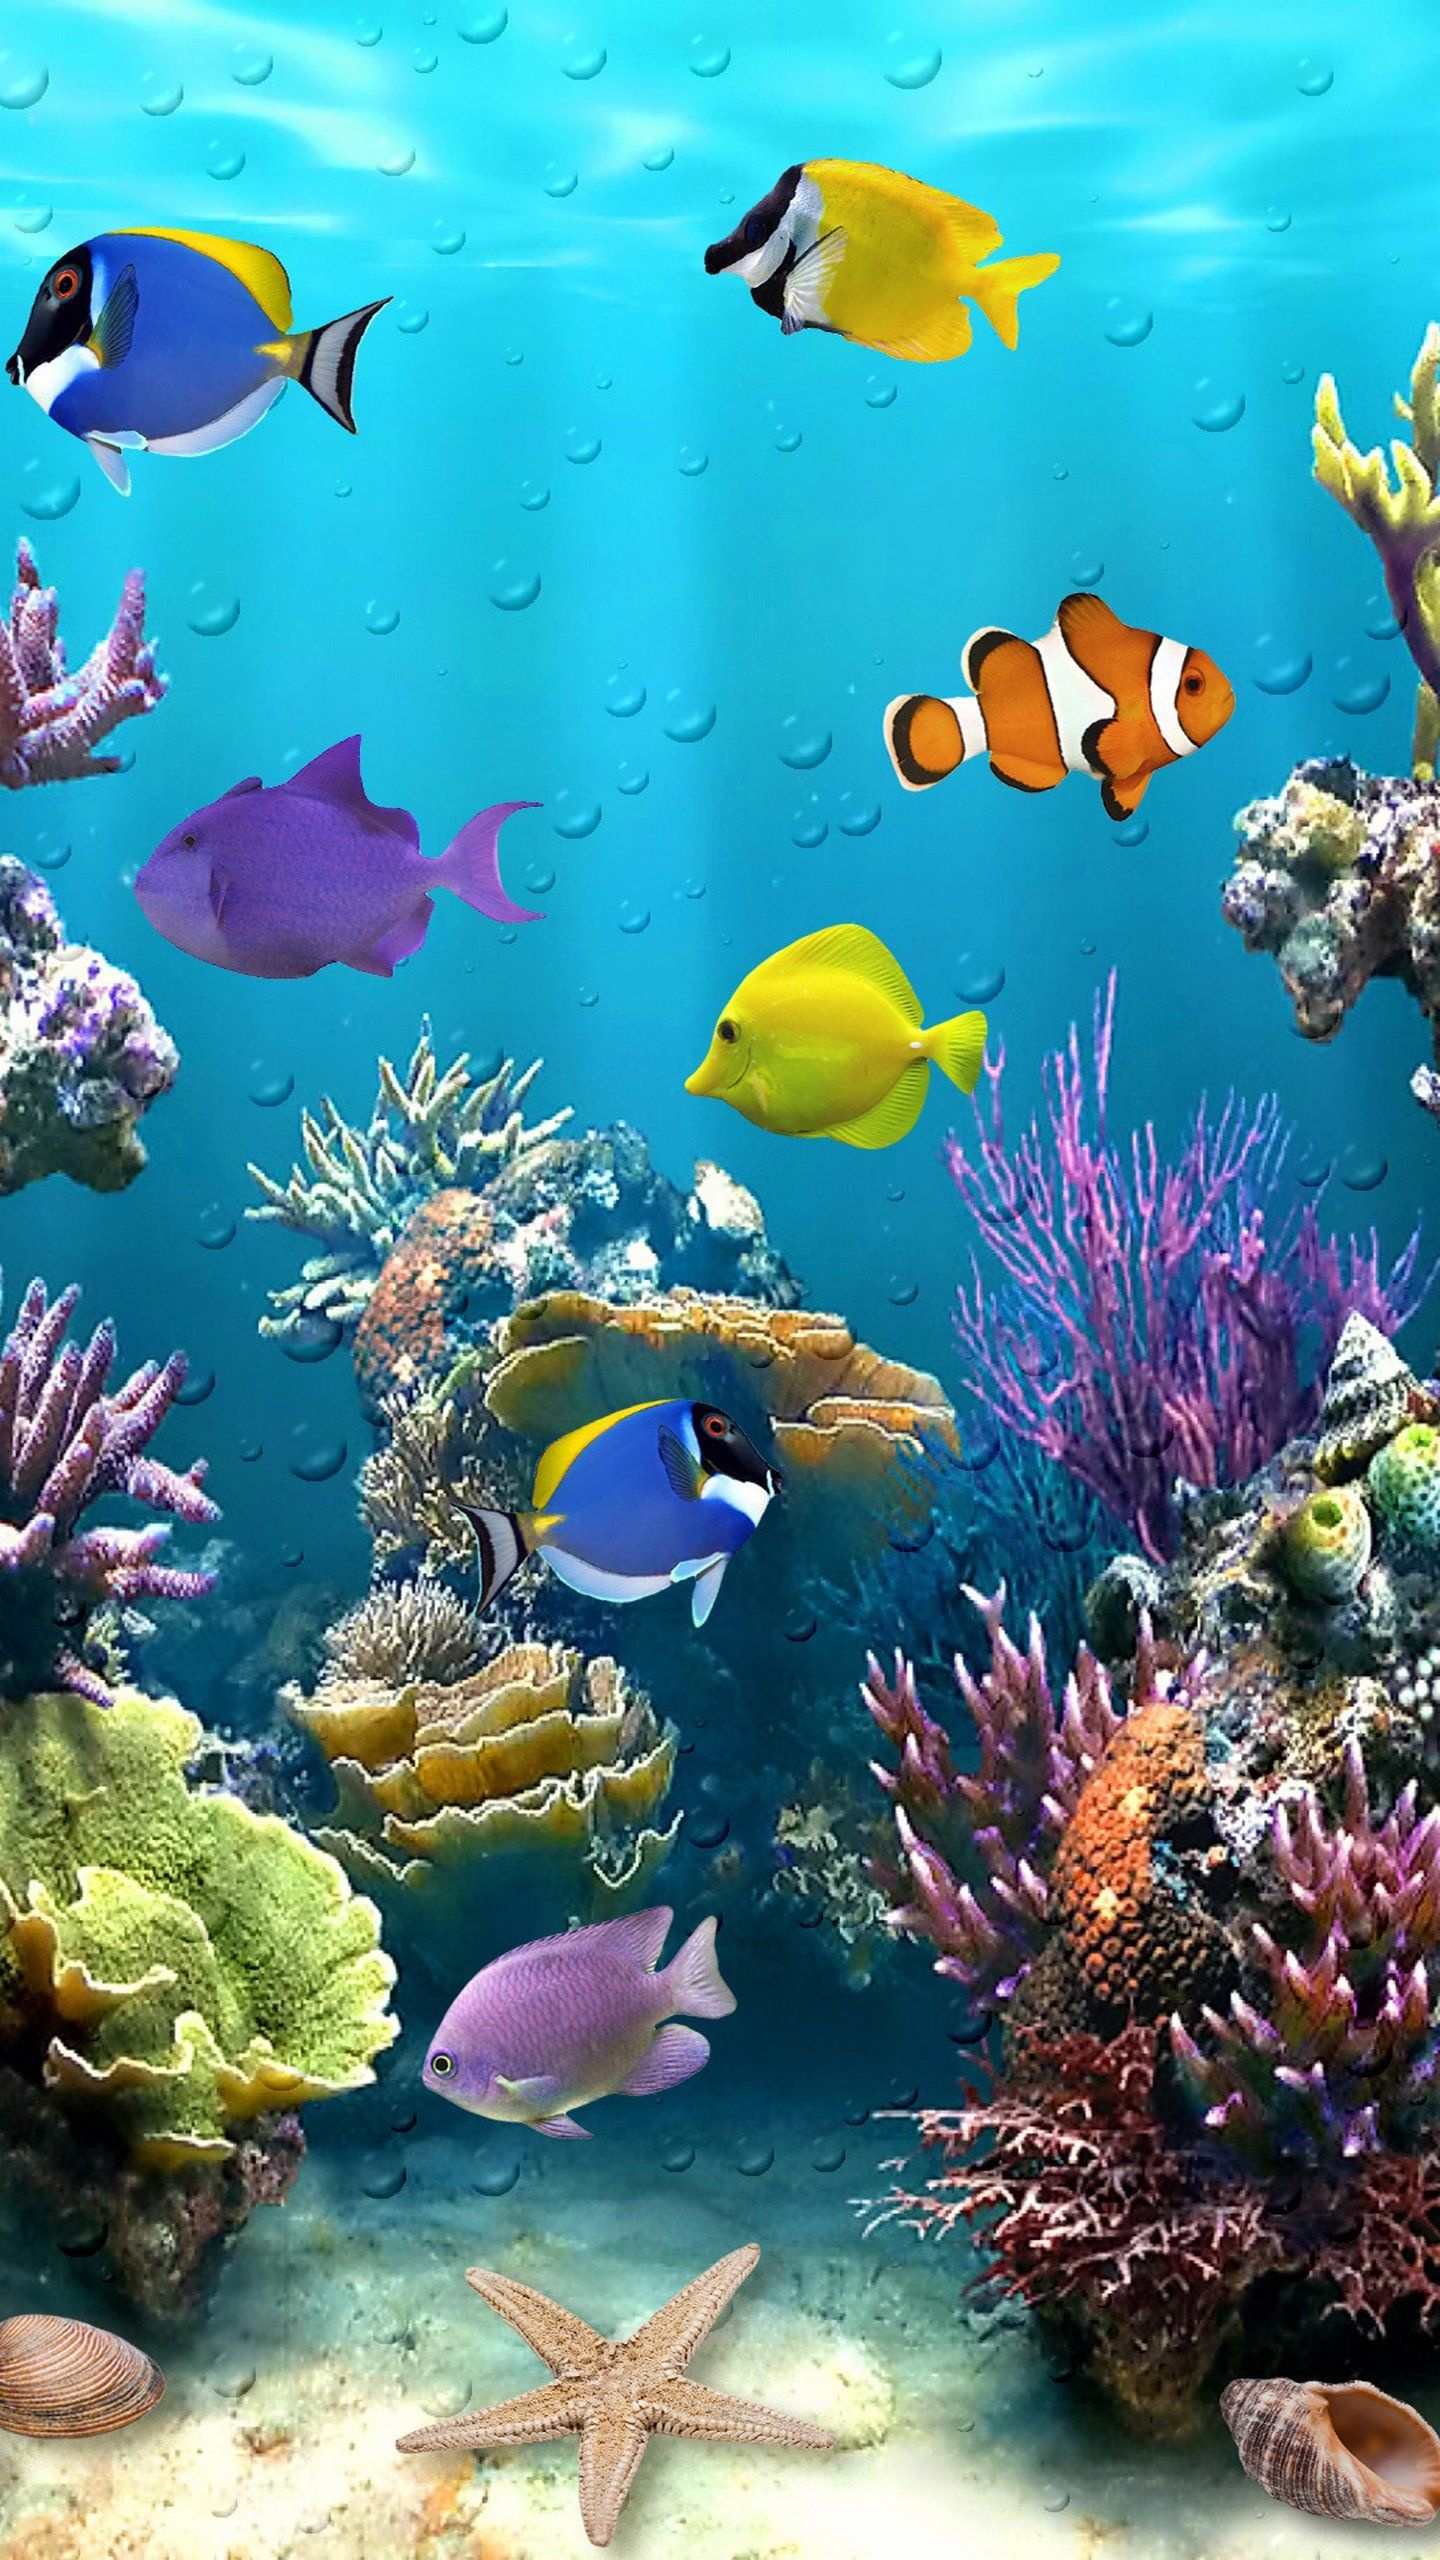 Underwater fish wallpapers, HD backgrounds, Marine beauty, Colorful aquatic creatures, 1440x2560 HD Handy